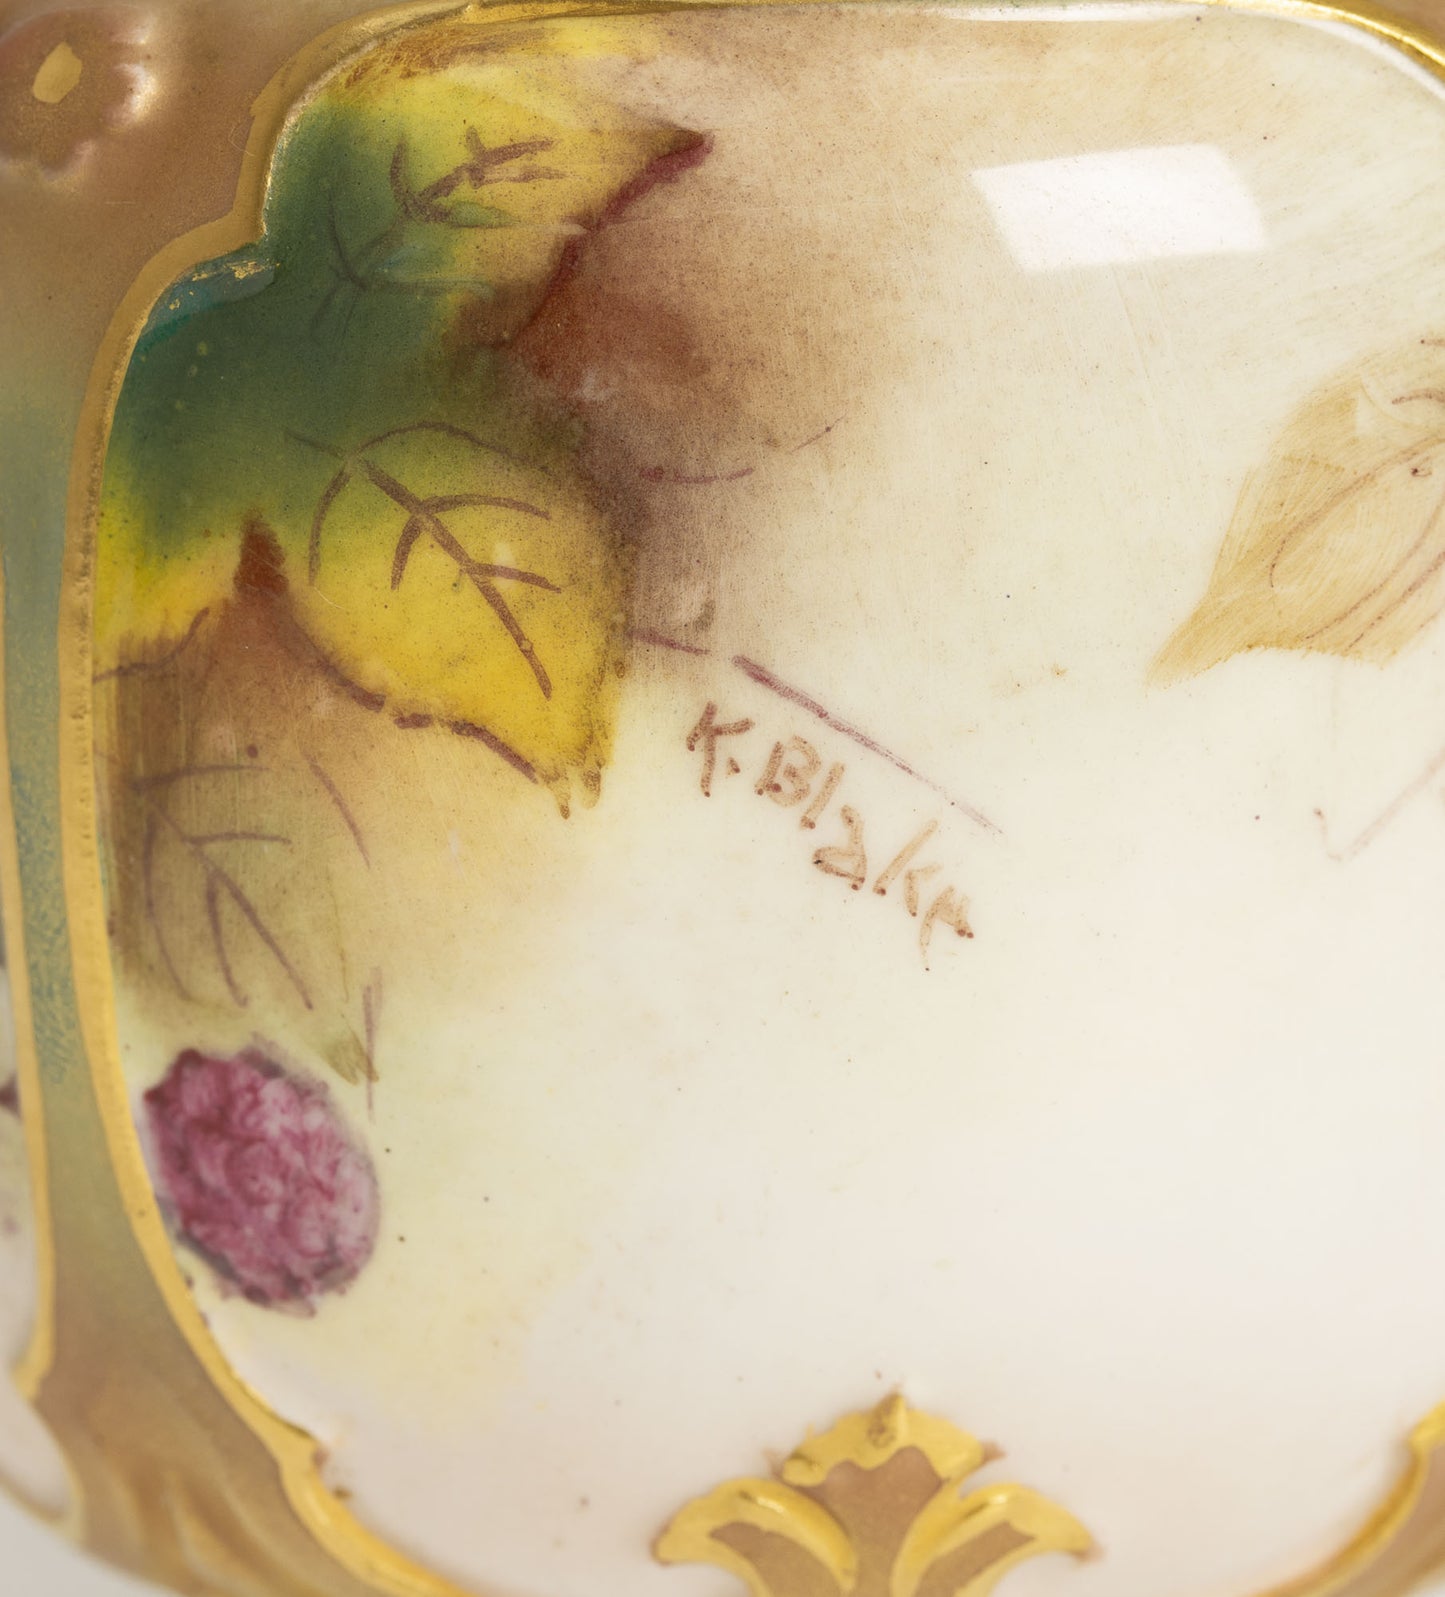 Royal Worcester Vase Hand Painted with Blackberries and Leaves by Kitty Blake (2956)